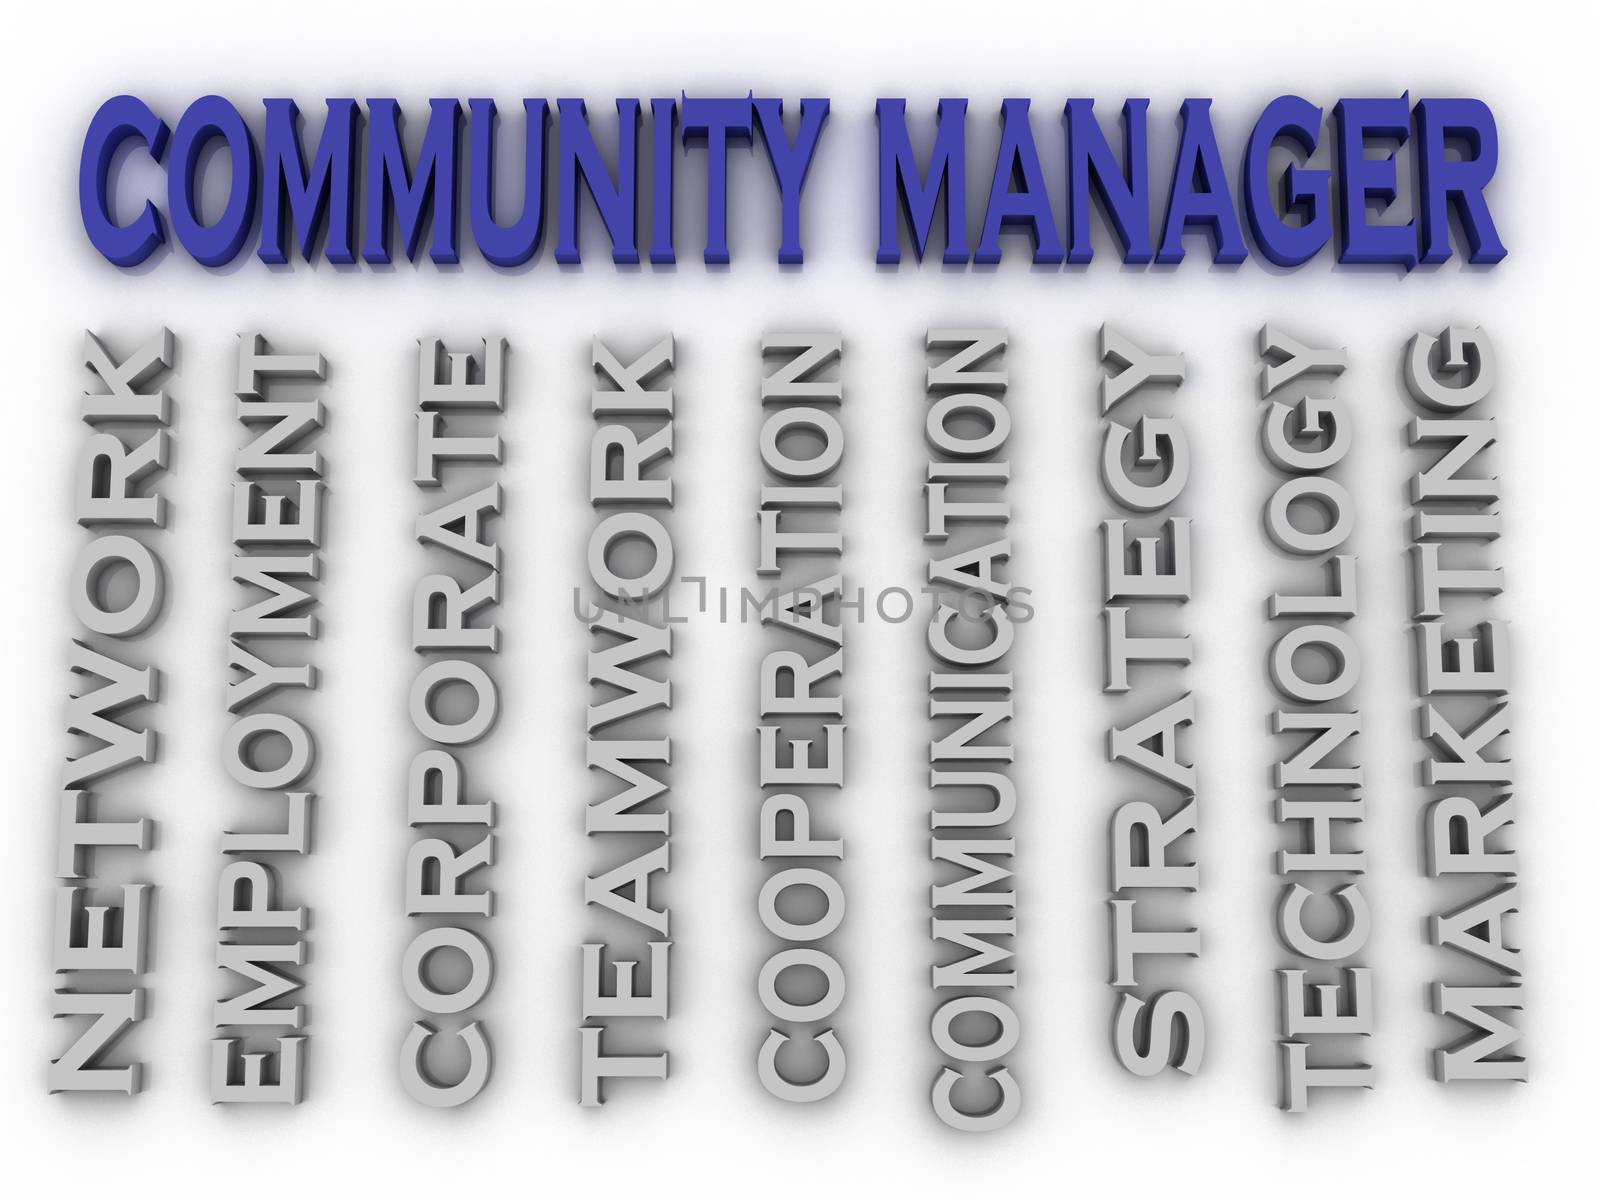 3d image Community manager issues concept word cloud background by dacasdo